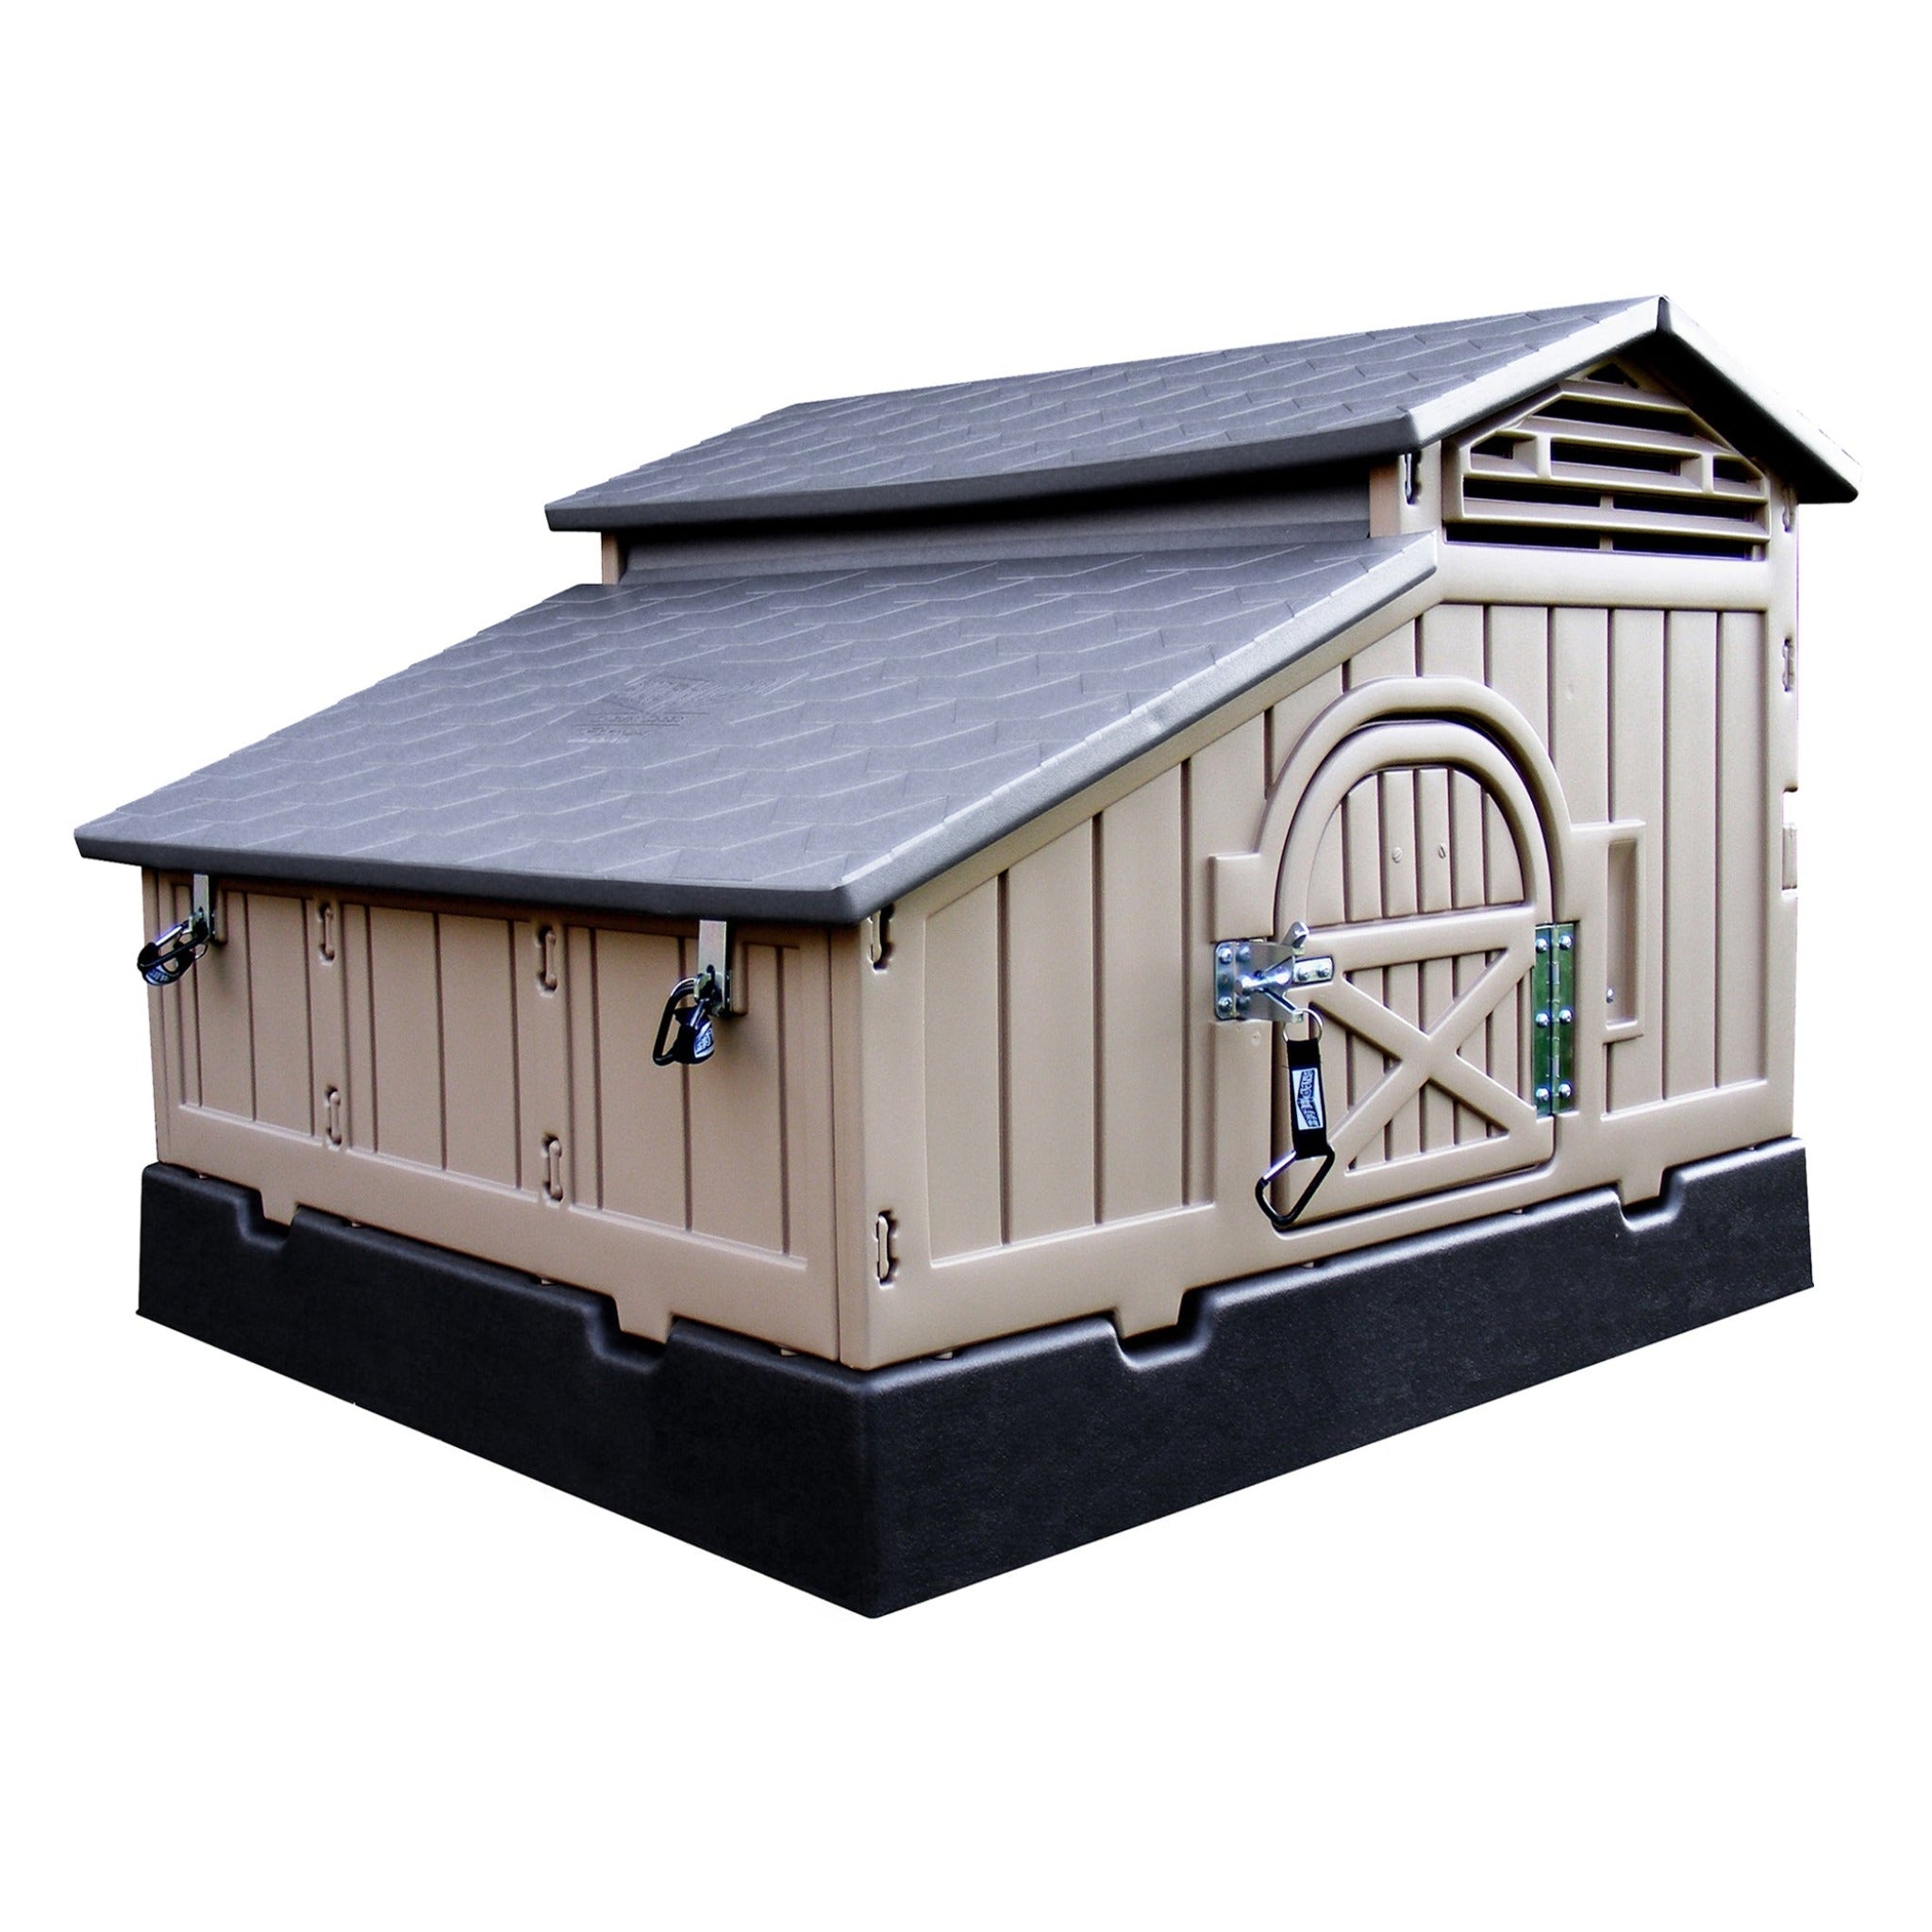 Hatching Time. Standard Formex Chicken coop. Front view with doors closed.